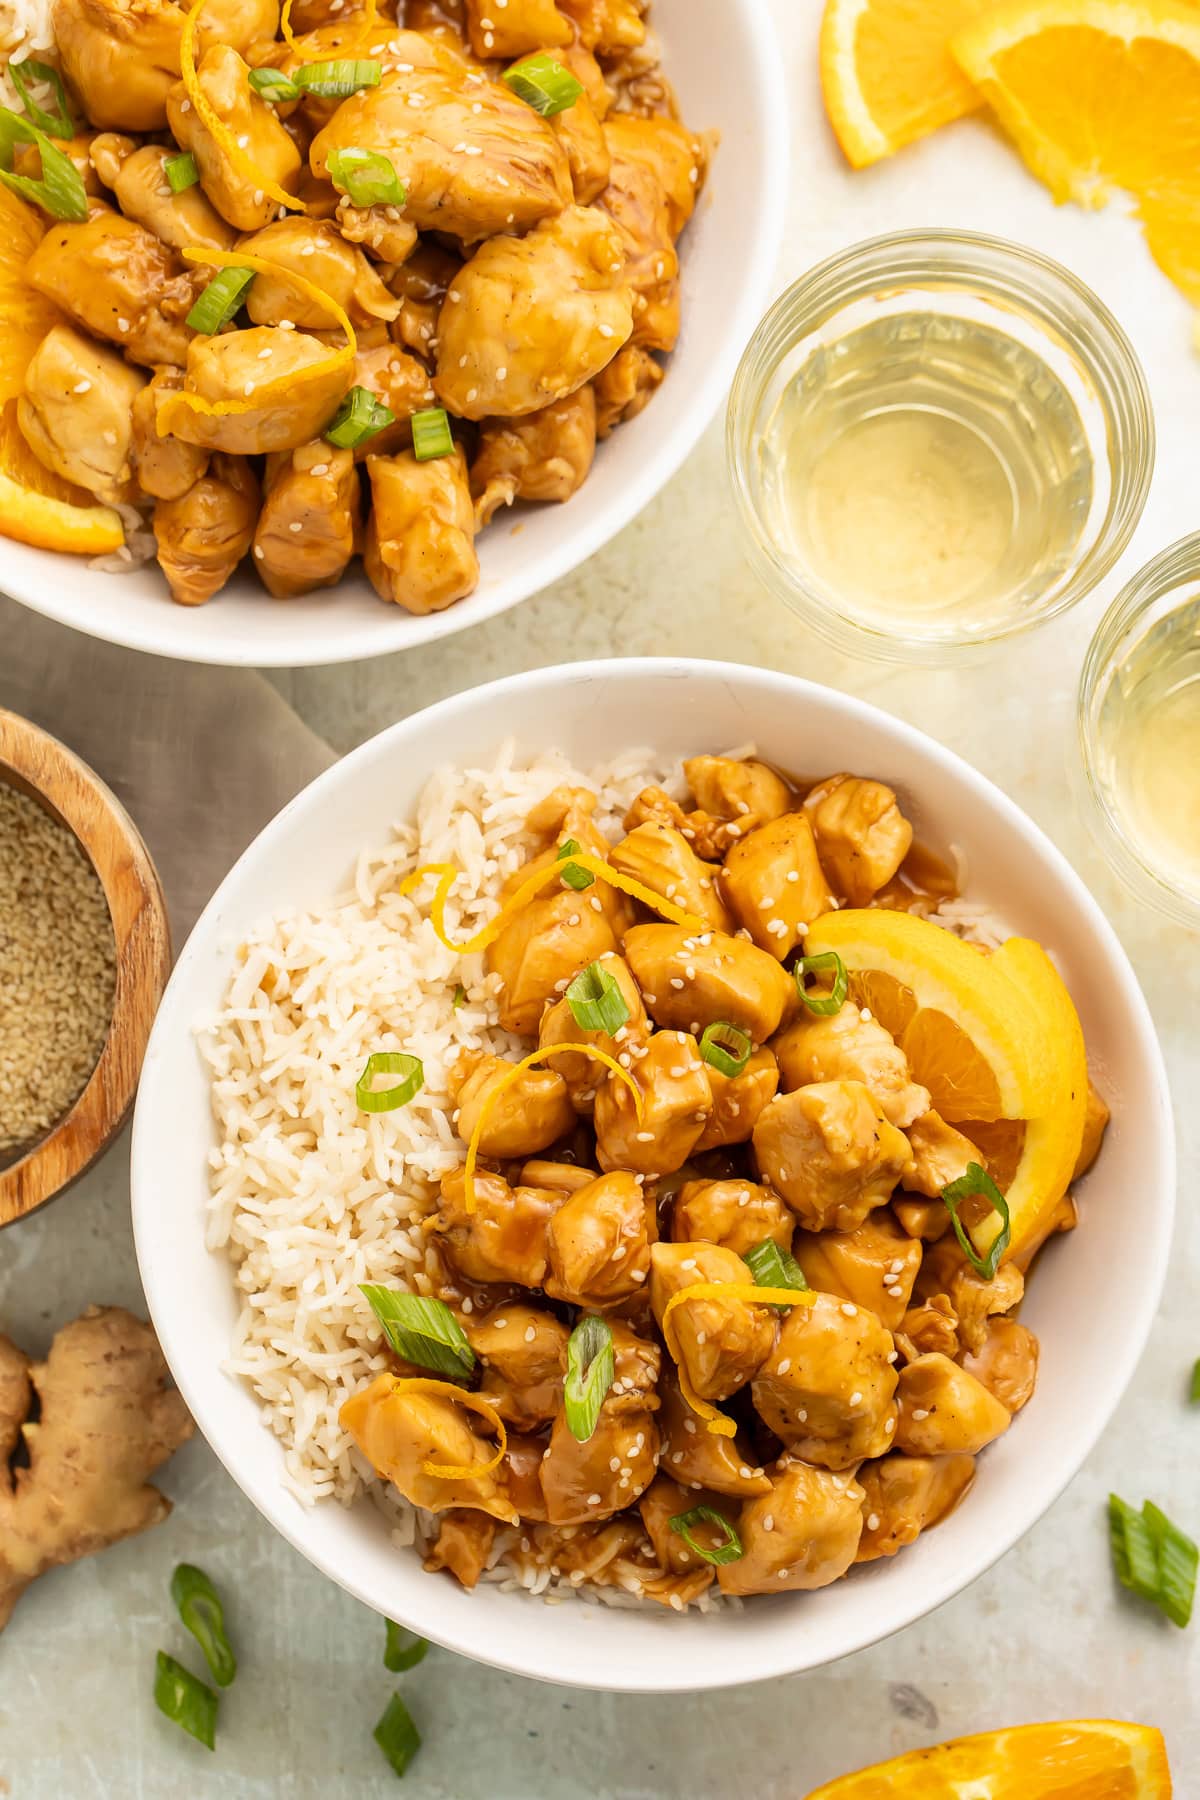 Overhead view of 2 bowls holding fluffy white rice, pieces of glazed orange chicken, orange wedges, and thinly sliced green onions.